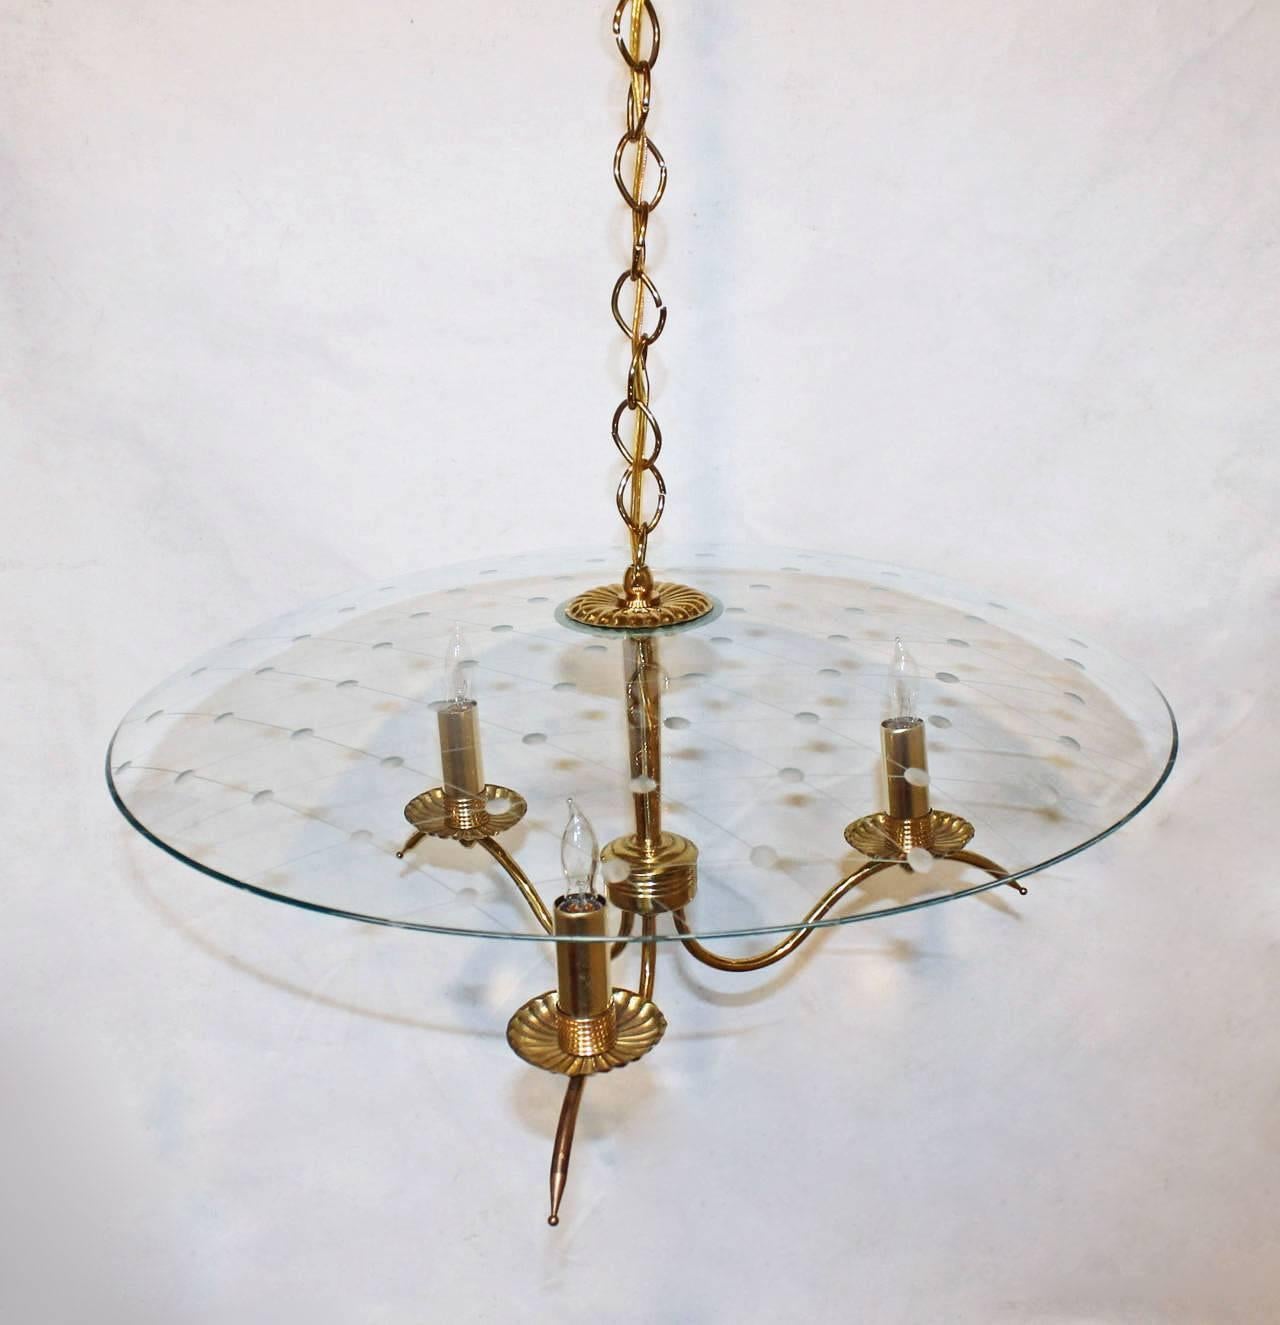 European Exquisite Italian Fontana Arte Style Brass Etched Glass Chandelier For Sale